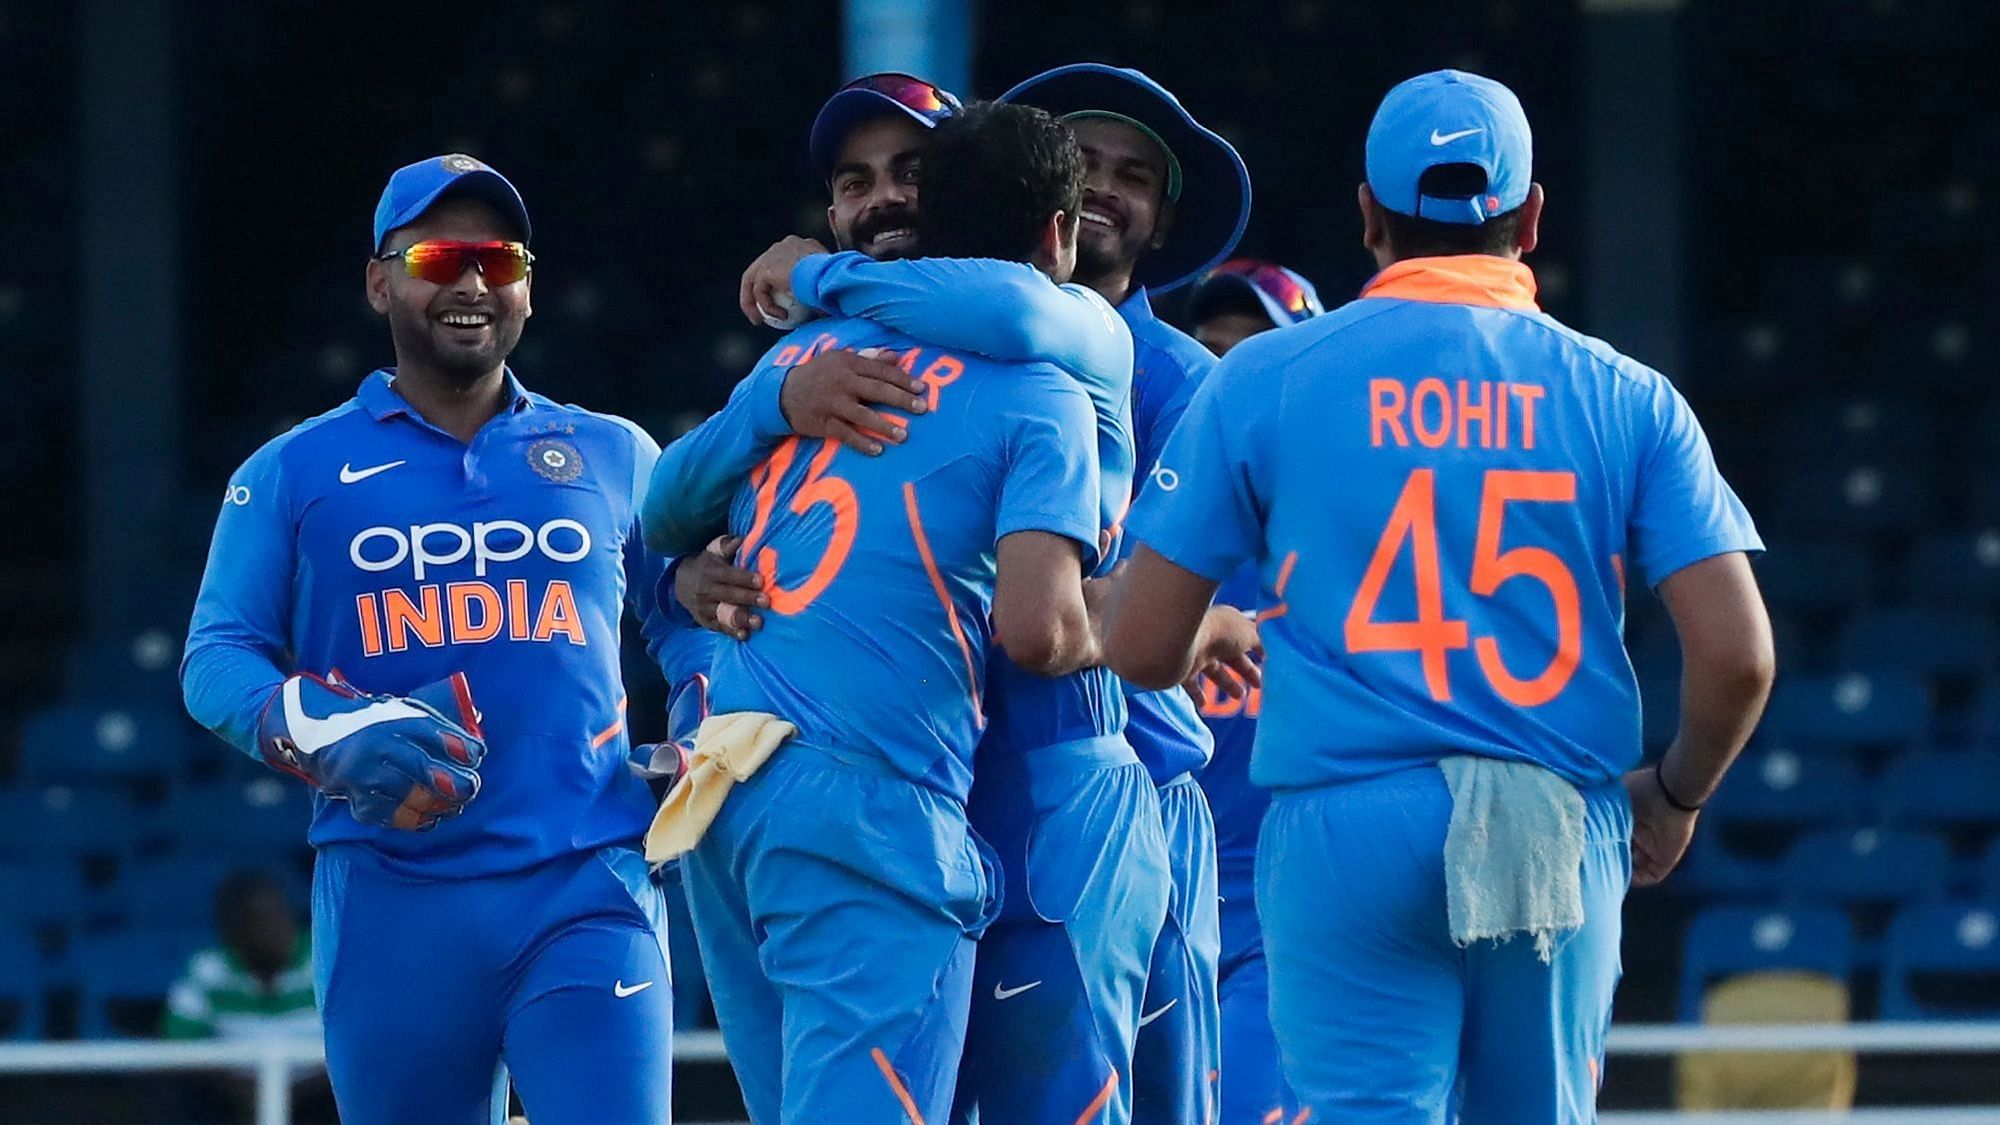 Asia Cup 2022 India Vs Hong Kong Live Streaming, Where To Watch Live, Date, Time, and Other Details